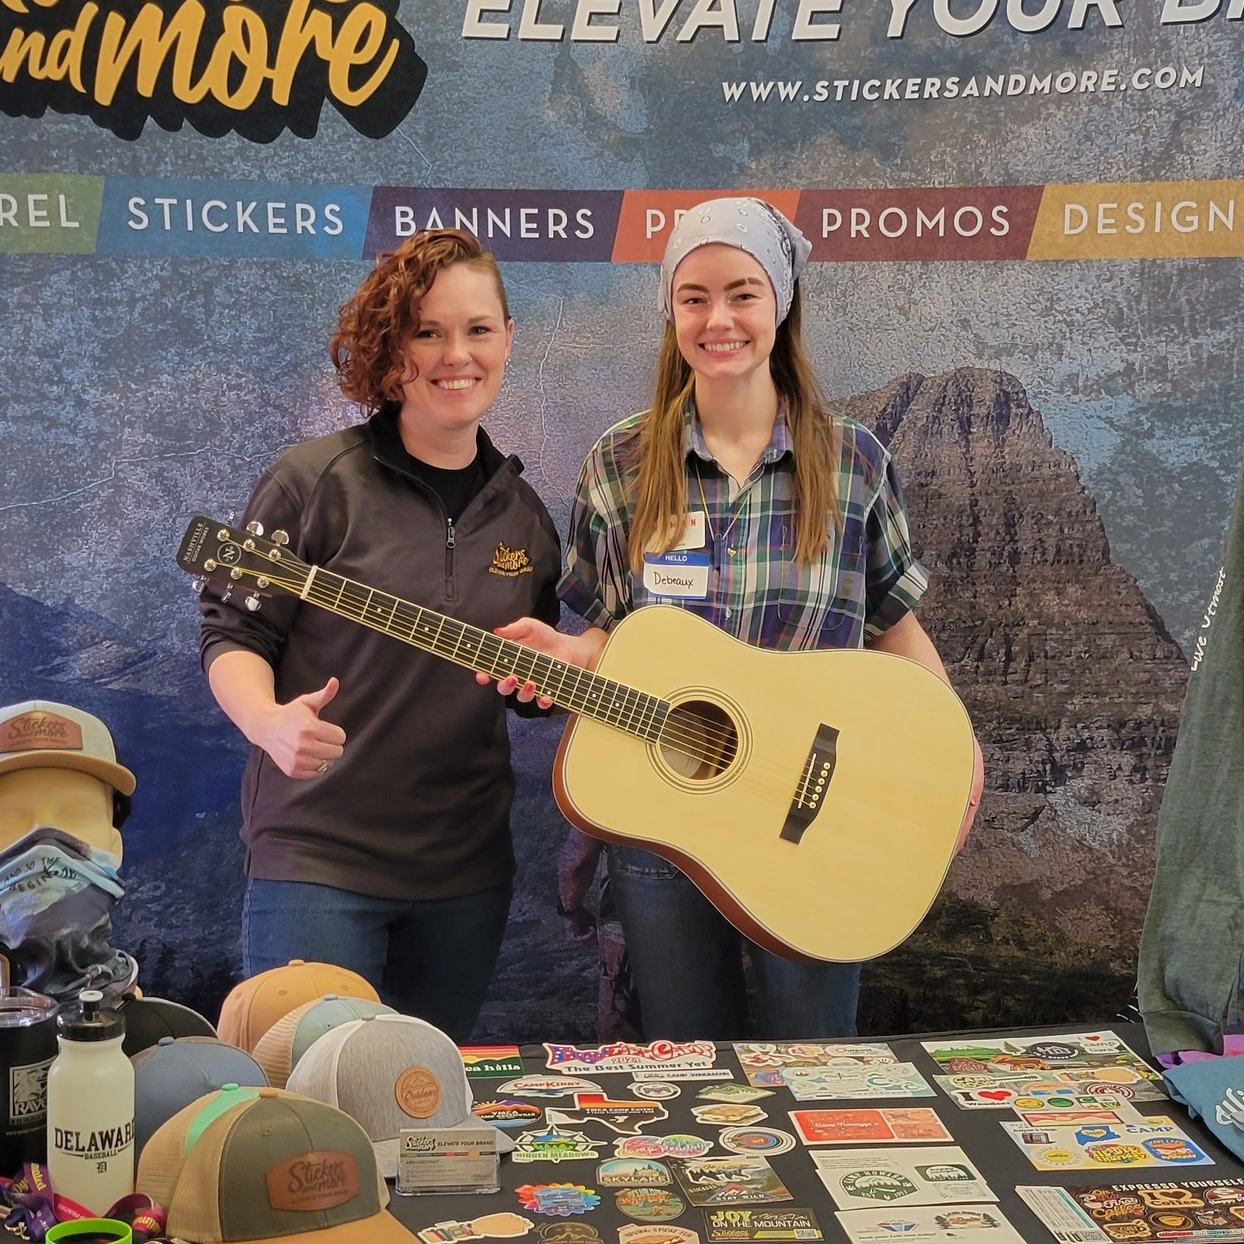 Congrats to Debeaux from Wyman Center on winning the guitar at the American Camp Association St. Louis Spring Gathering Conference. Check out our website and see how we can help you elevate your brand.
https://stickersandmore.com/camp/
@acacamps #camp #ACA #guitar #camplife #winnerswin #happycustomers